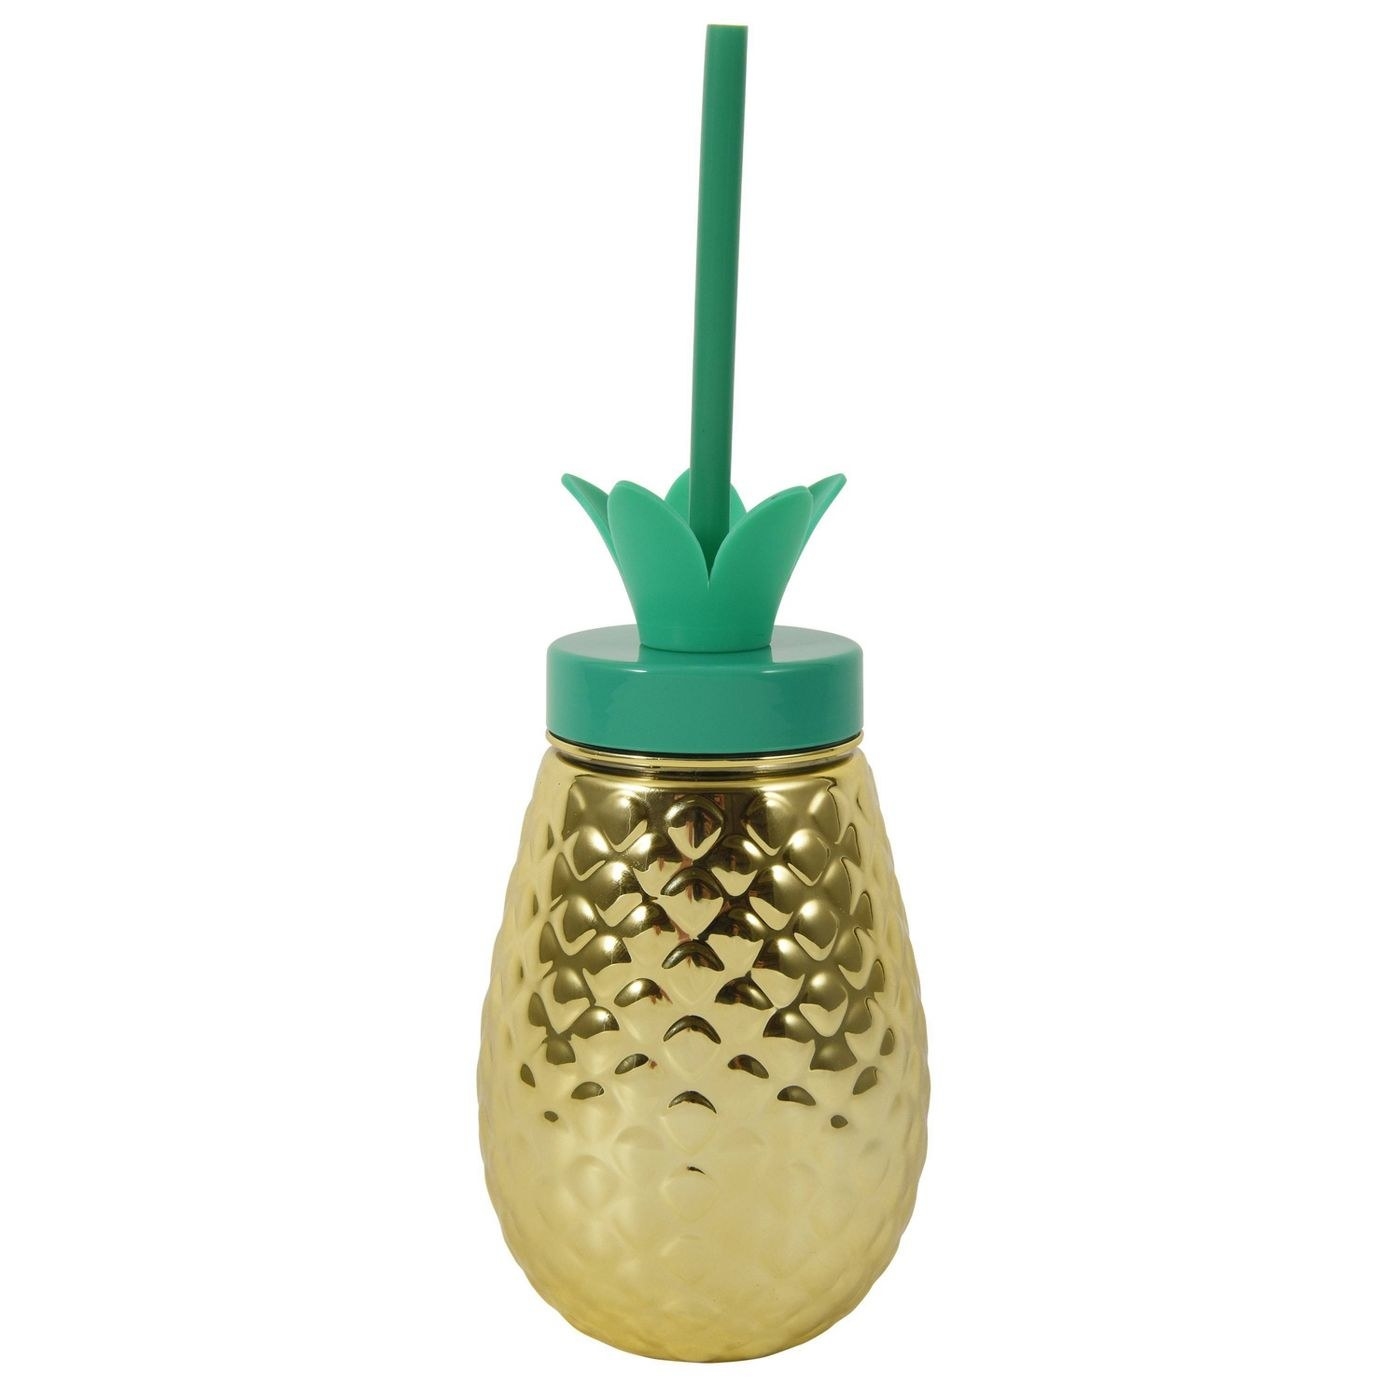 The gold and green cup with lid and straw